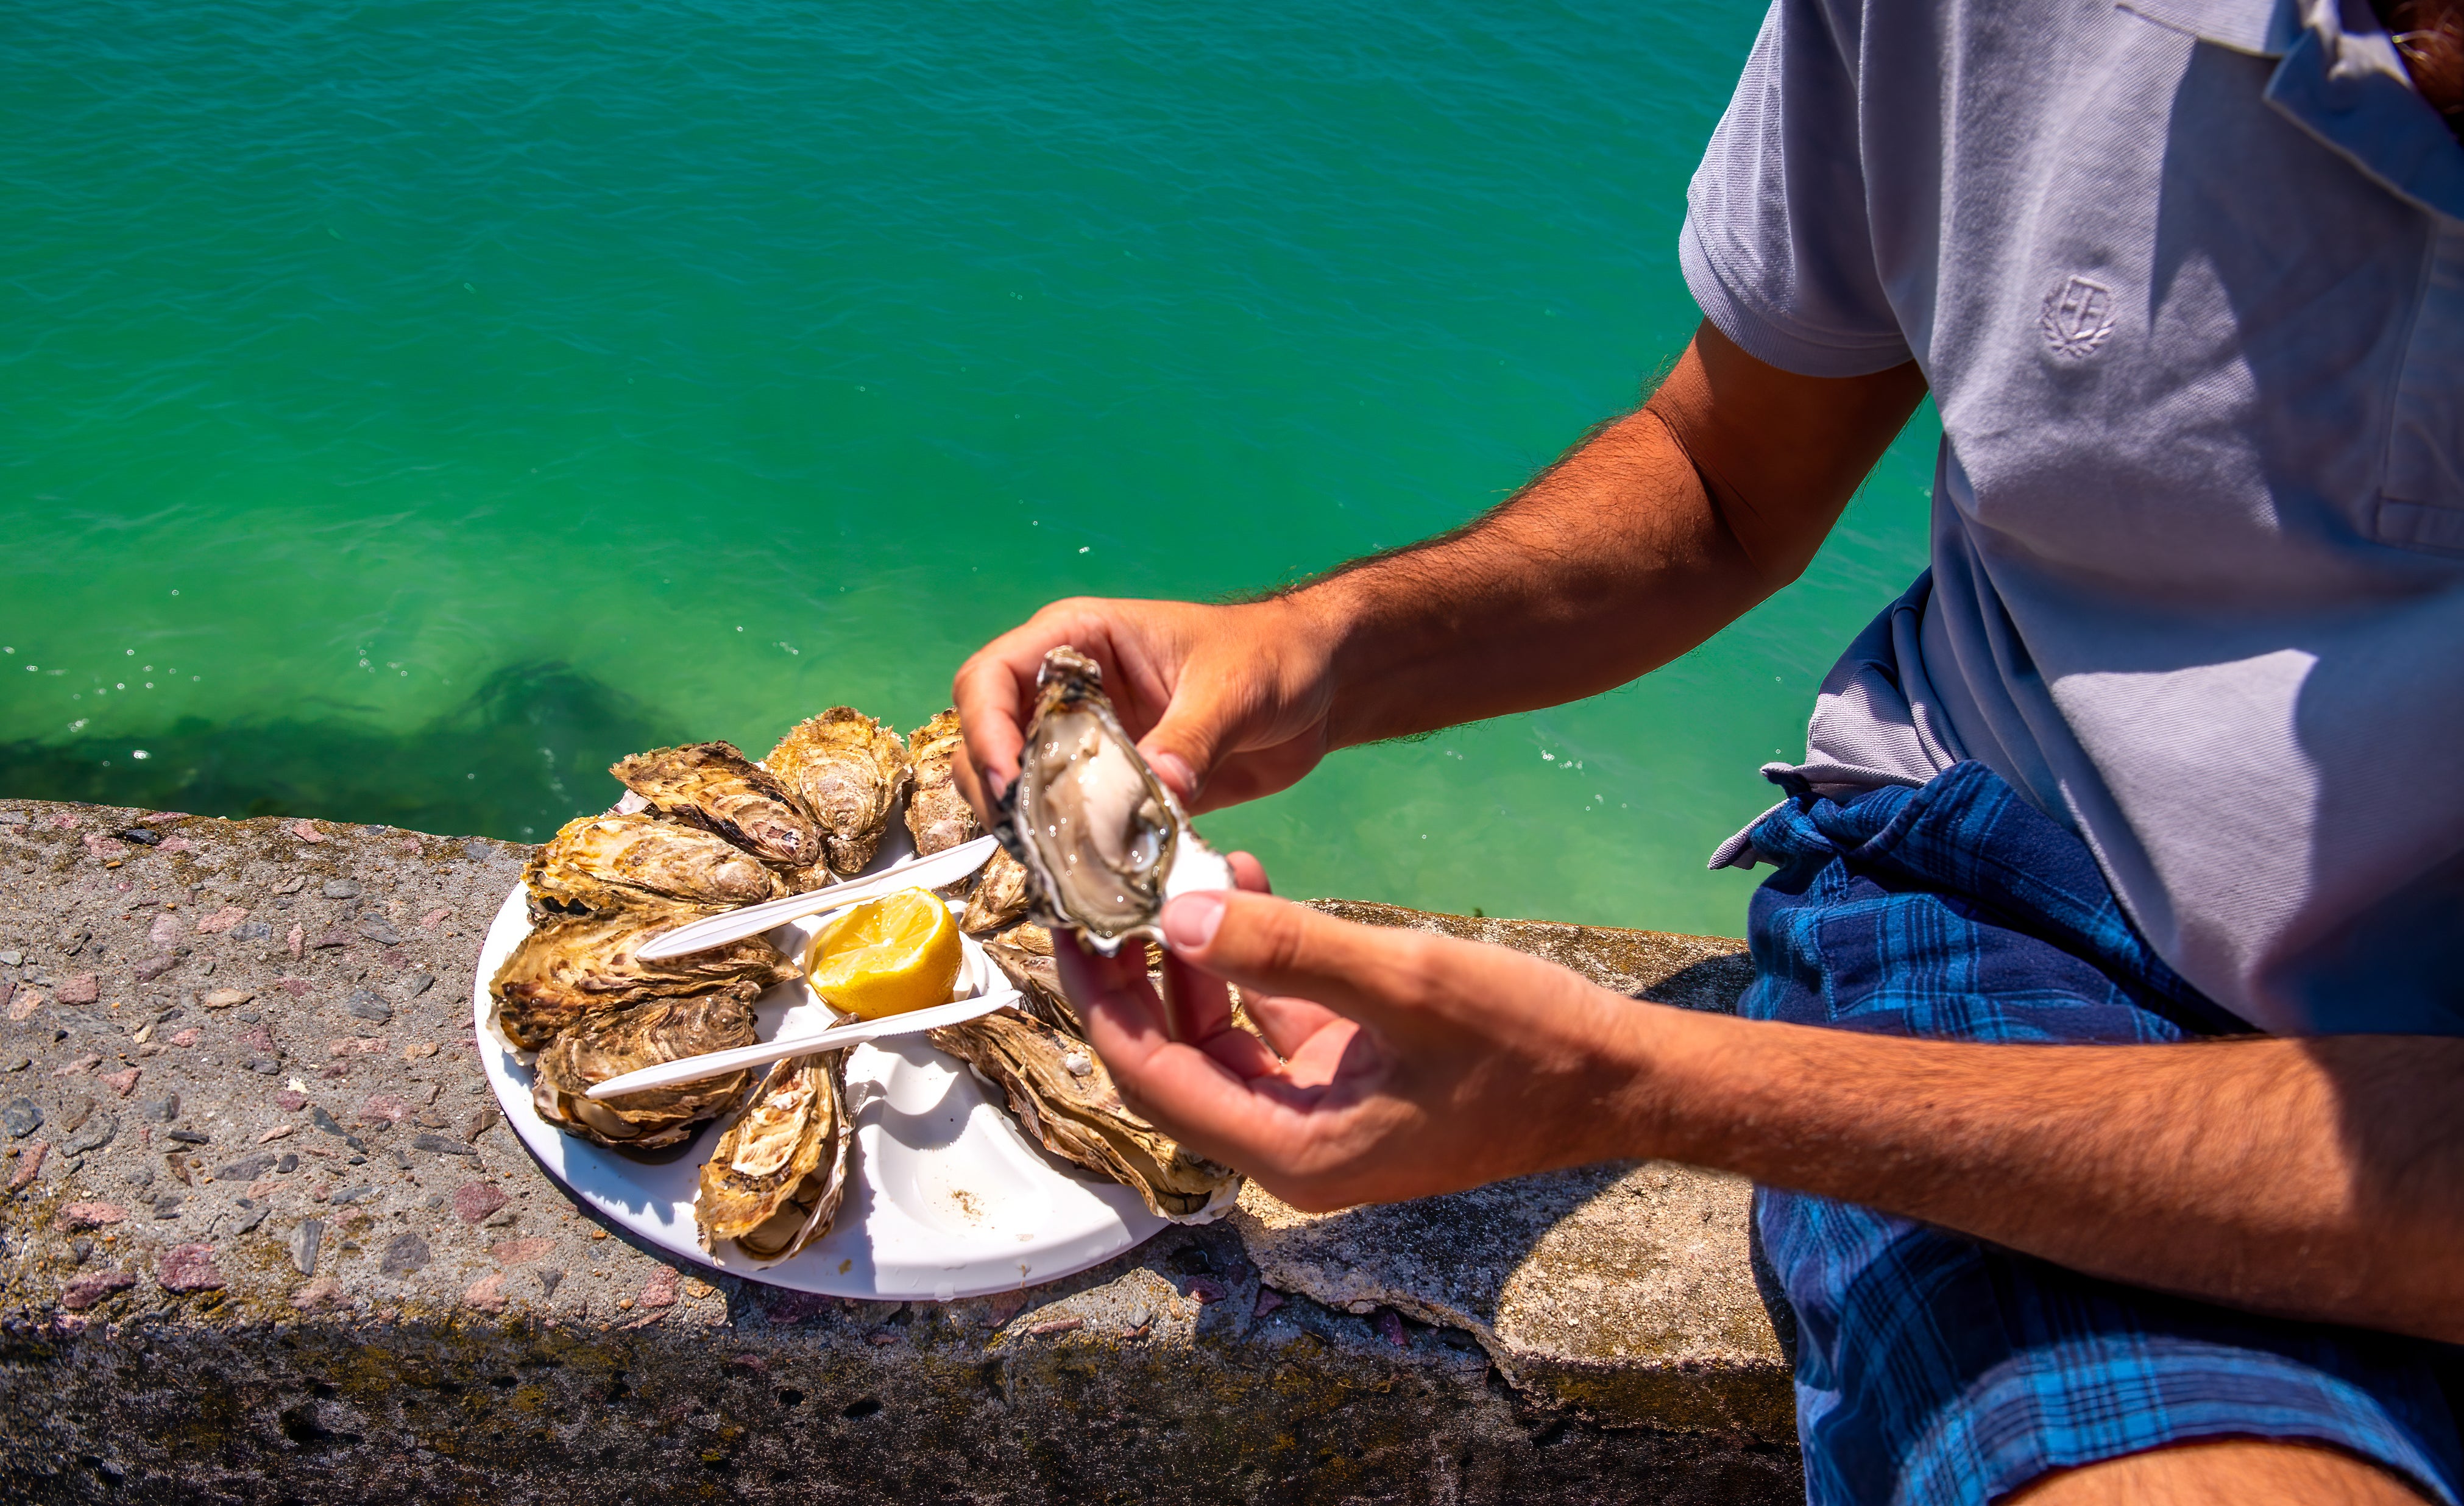 Seafood fans will be in their element in Brittany, from oysters to mussels and scallops